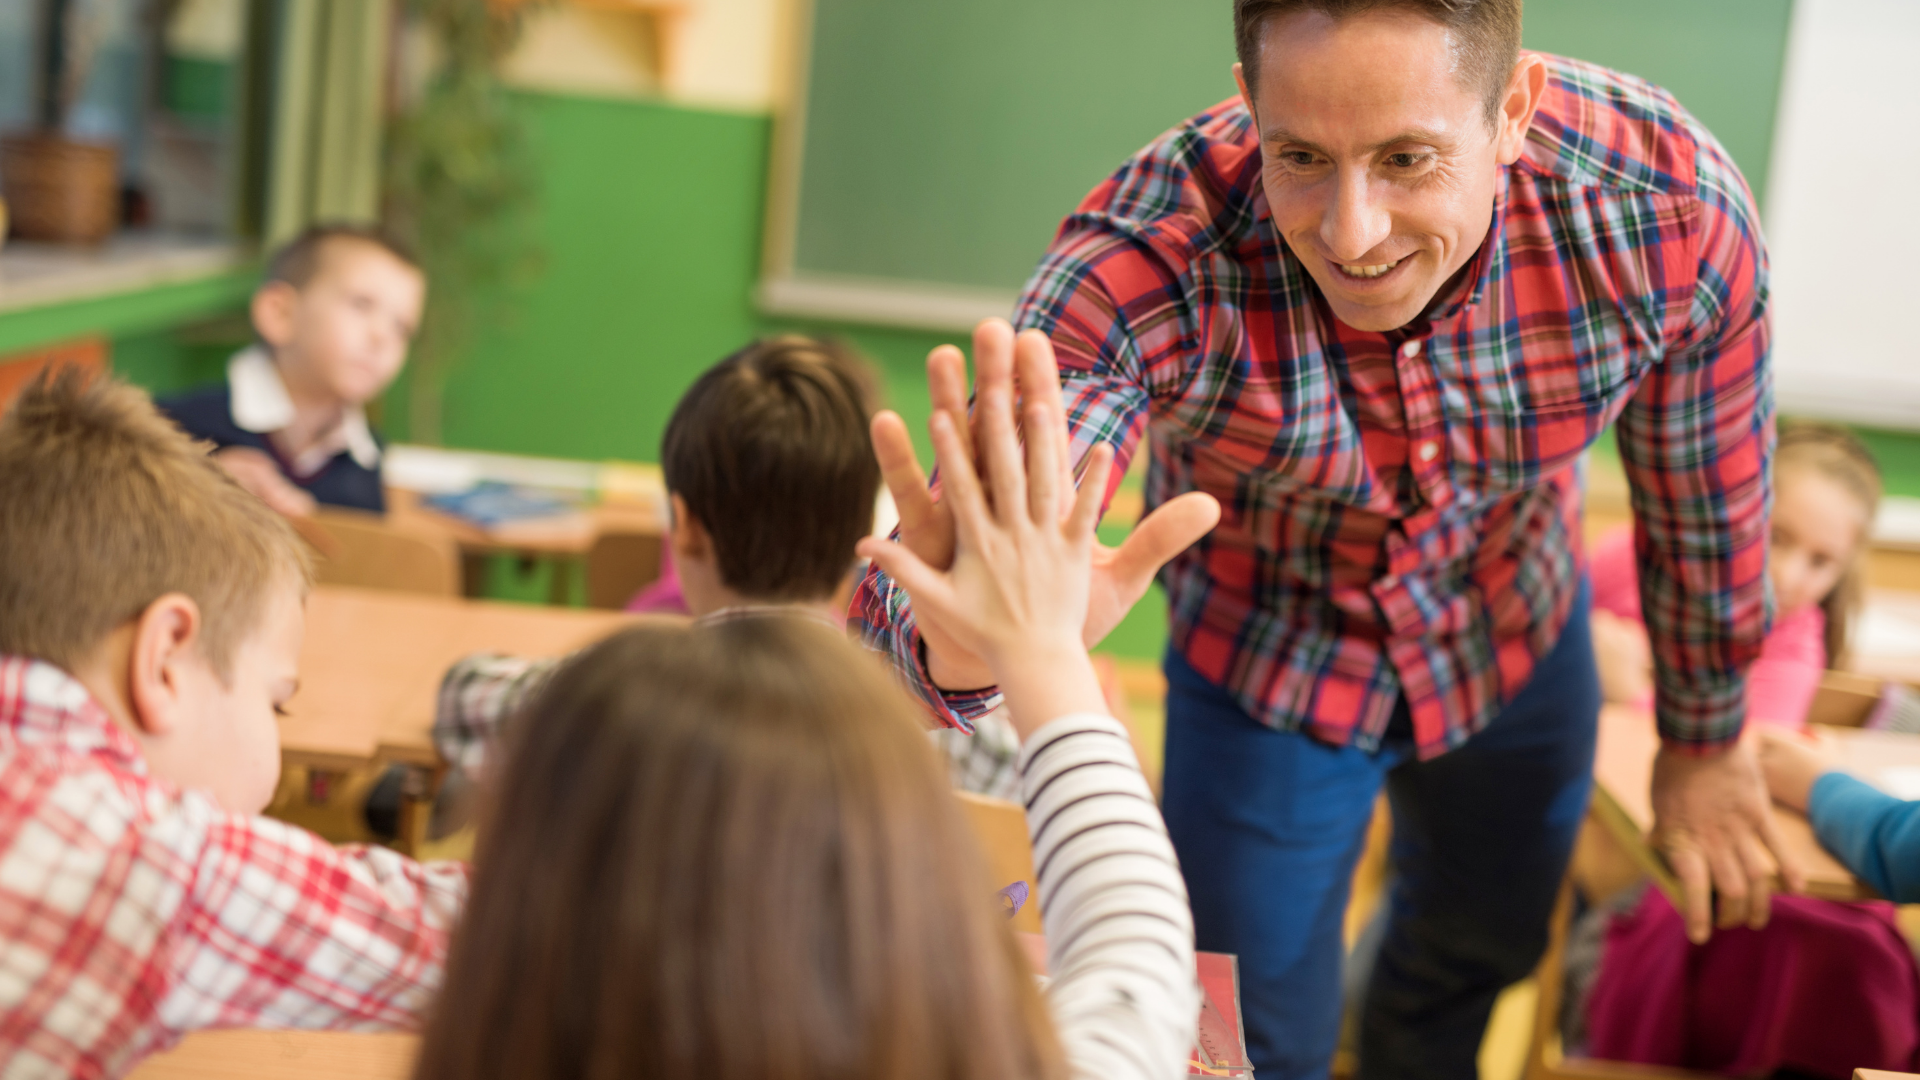 4 Ways to Build Positive Relationships with Students